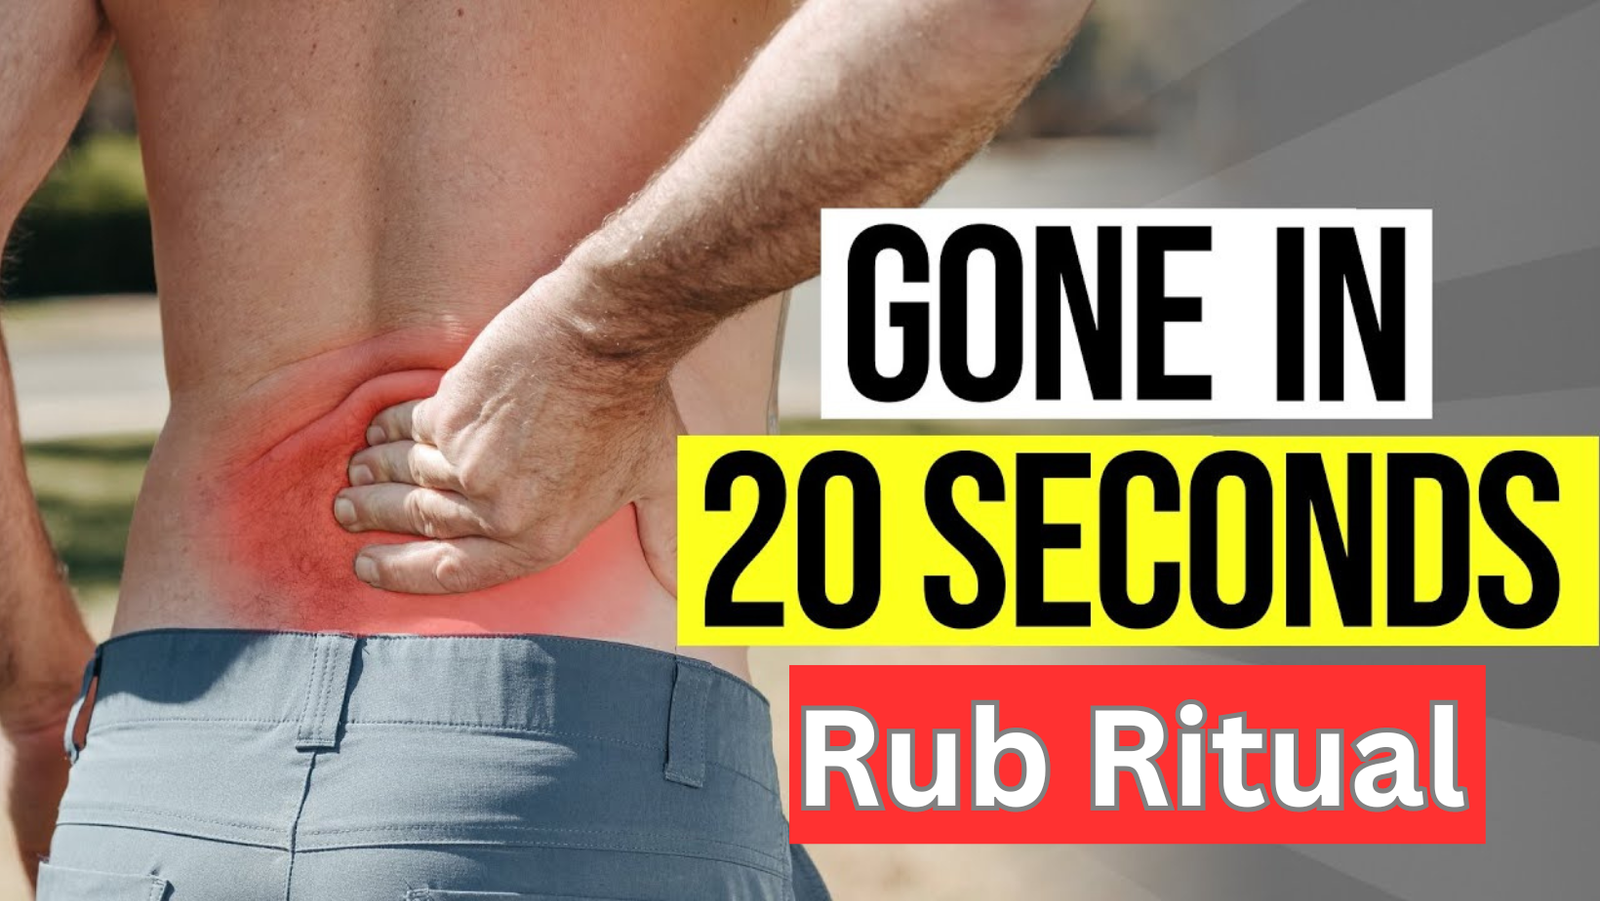 20 second rub ritual for back pain